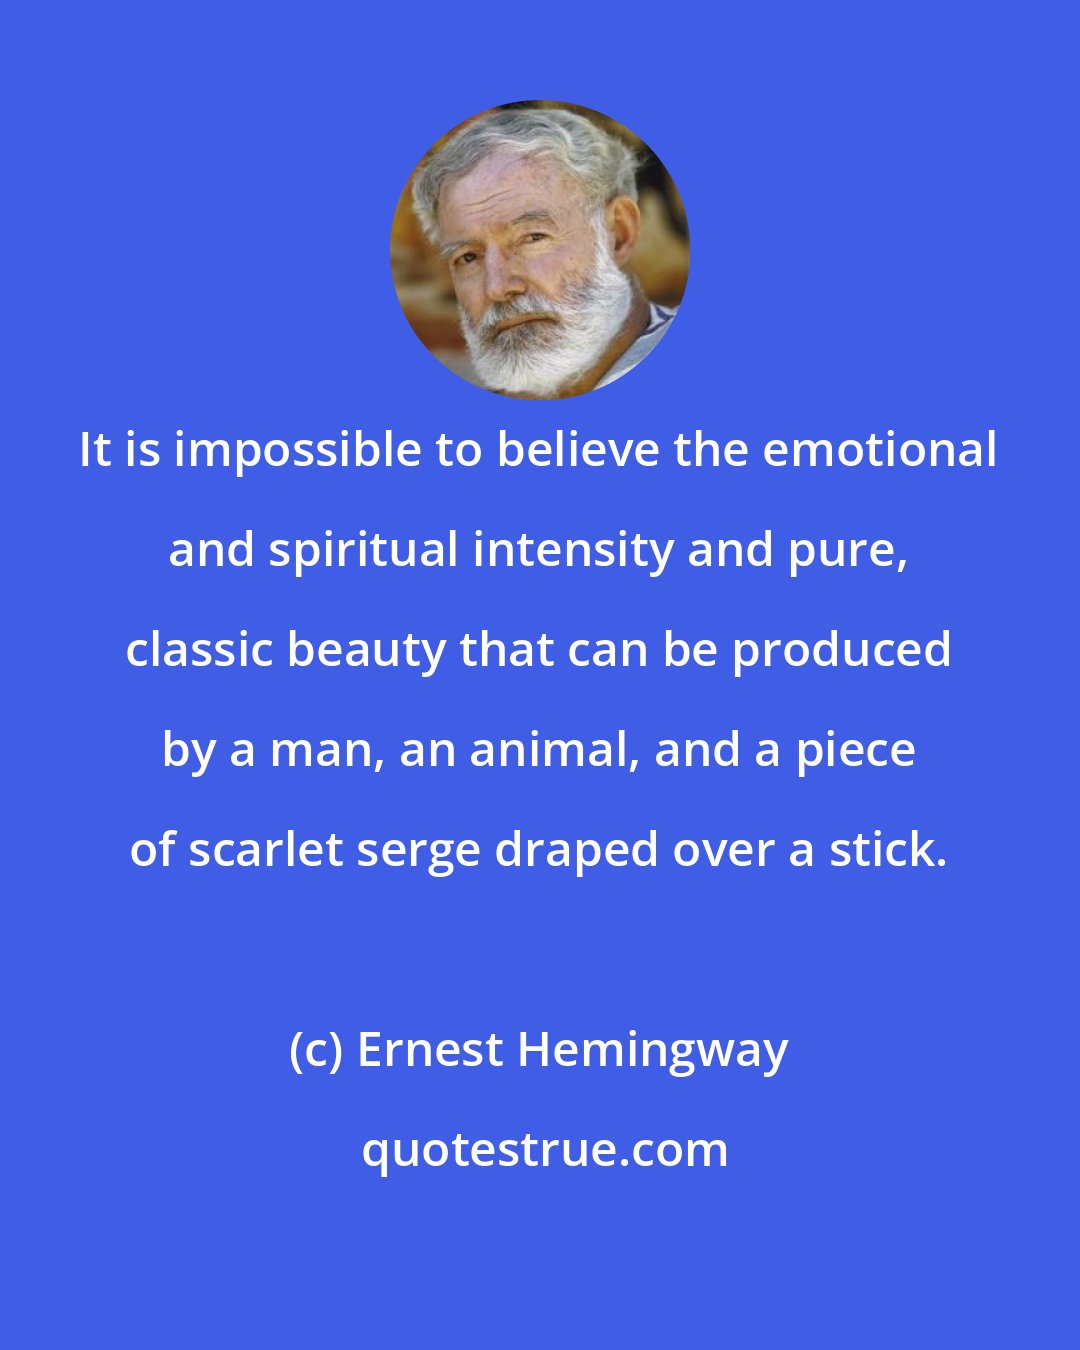 Ernest Hemingway: It is impossible to believe the emotional and spiritual intensity and pure, classic beauty that can be produced by a man, an animal, and a piece of scarlet serge draped over a stick.